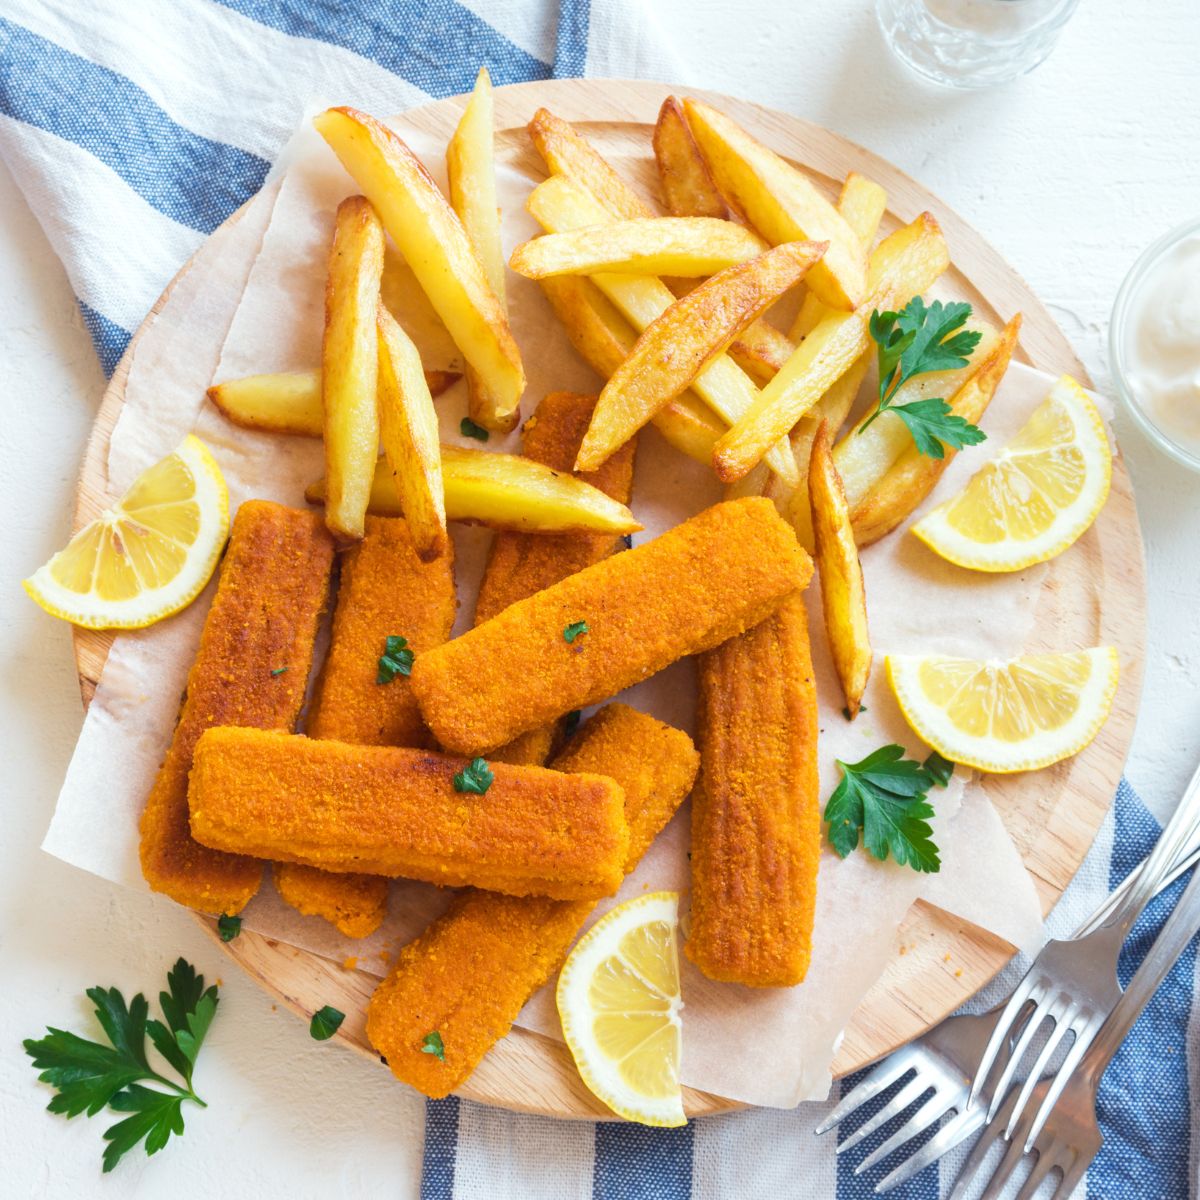 23 Easy Air Fryer Fish Sticks Recipes - Cottage at the Crossroads